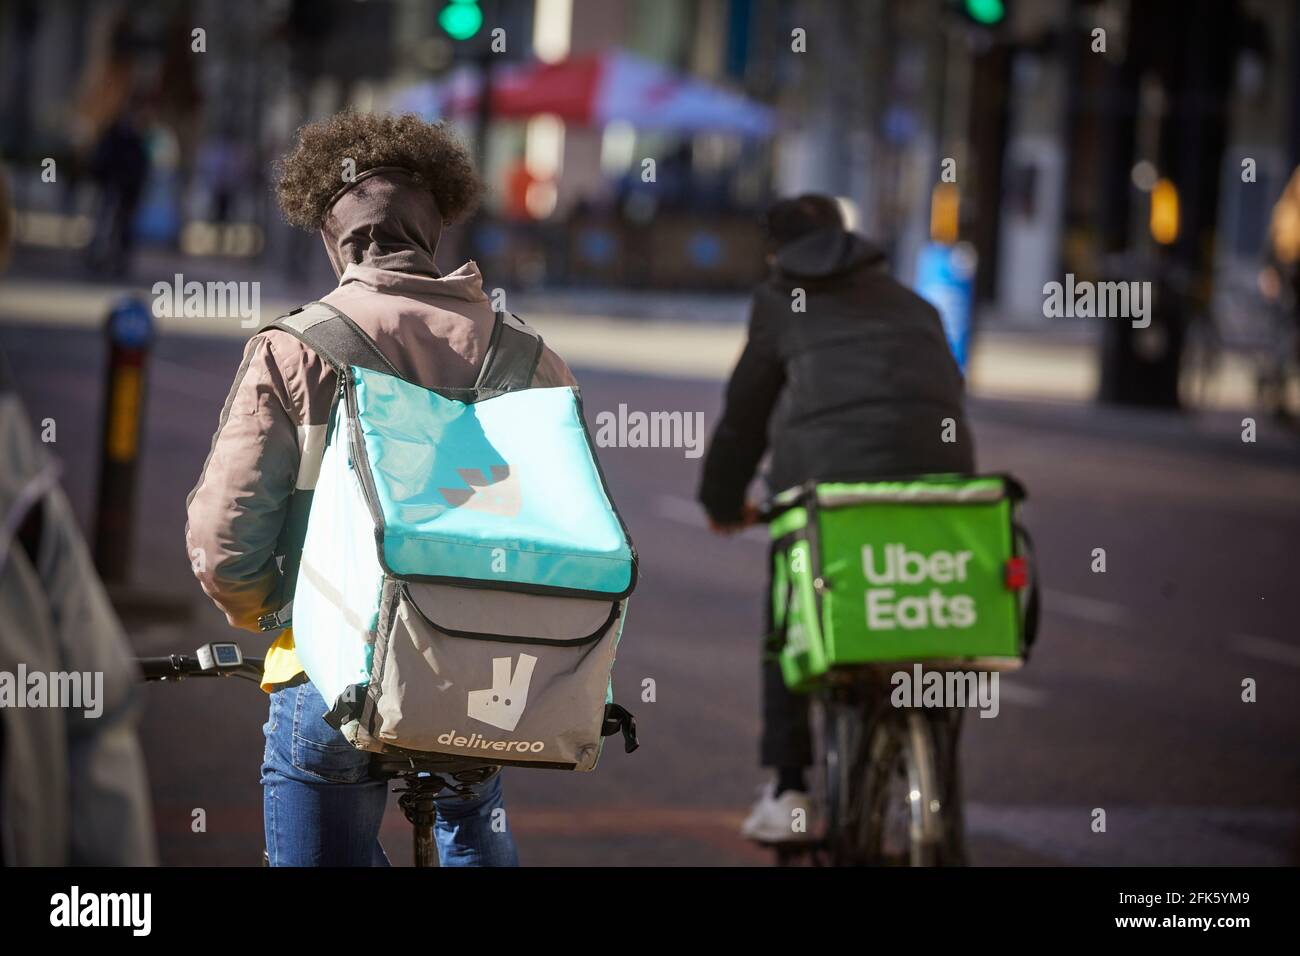 bike rider cycle courier Deliveroo online food delivery company Stock Photo